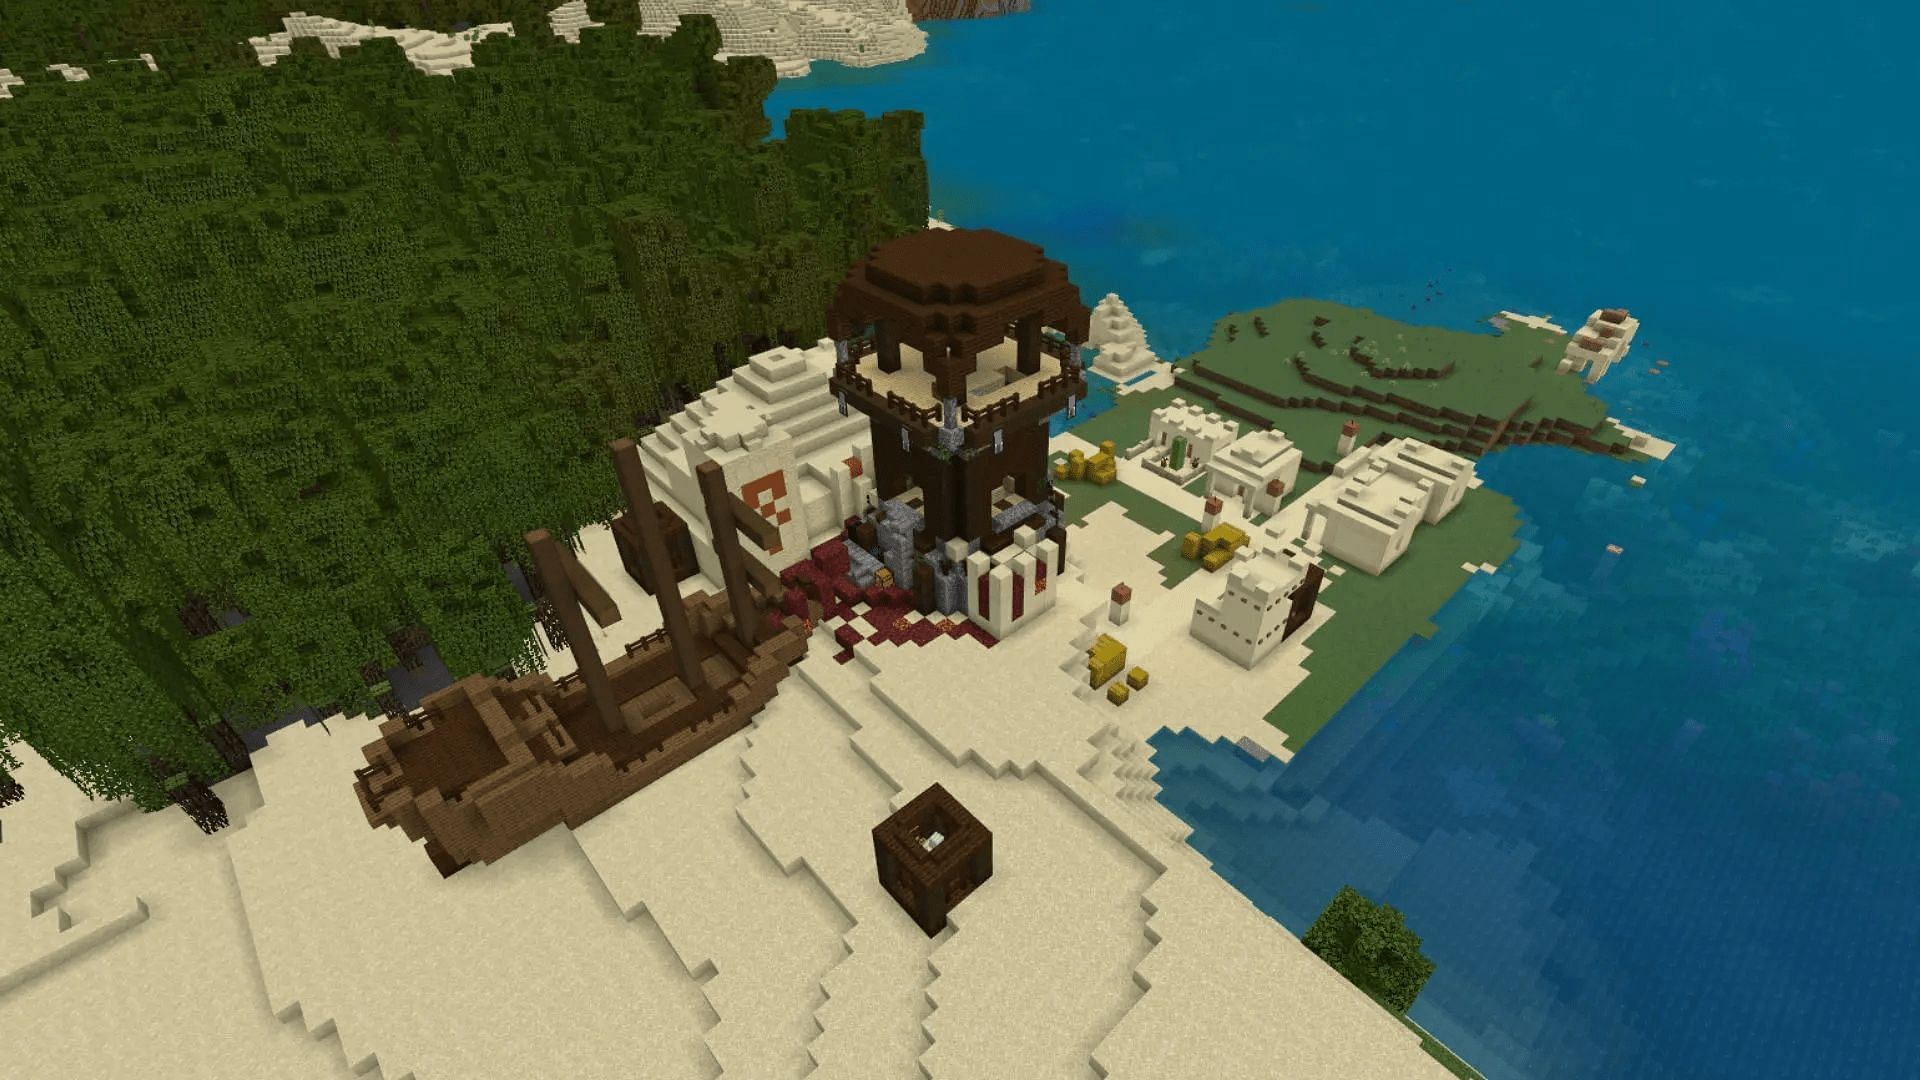 This seed's village can get a little hectic (Image via Mojang)